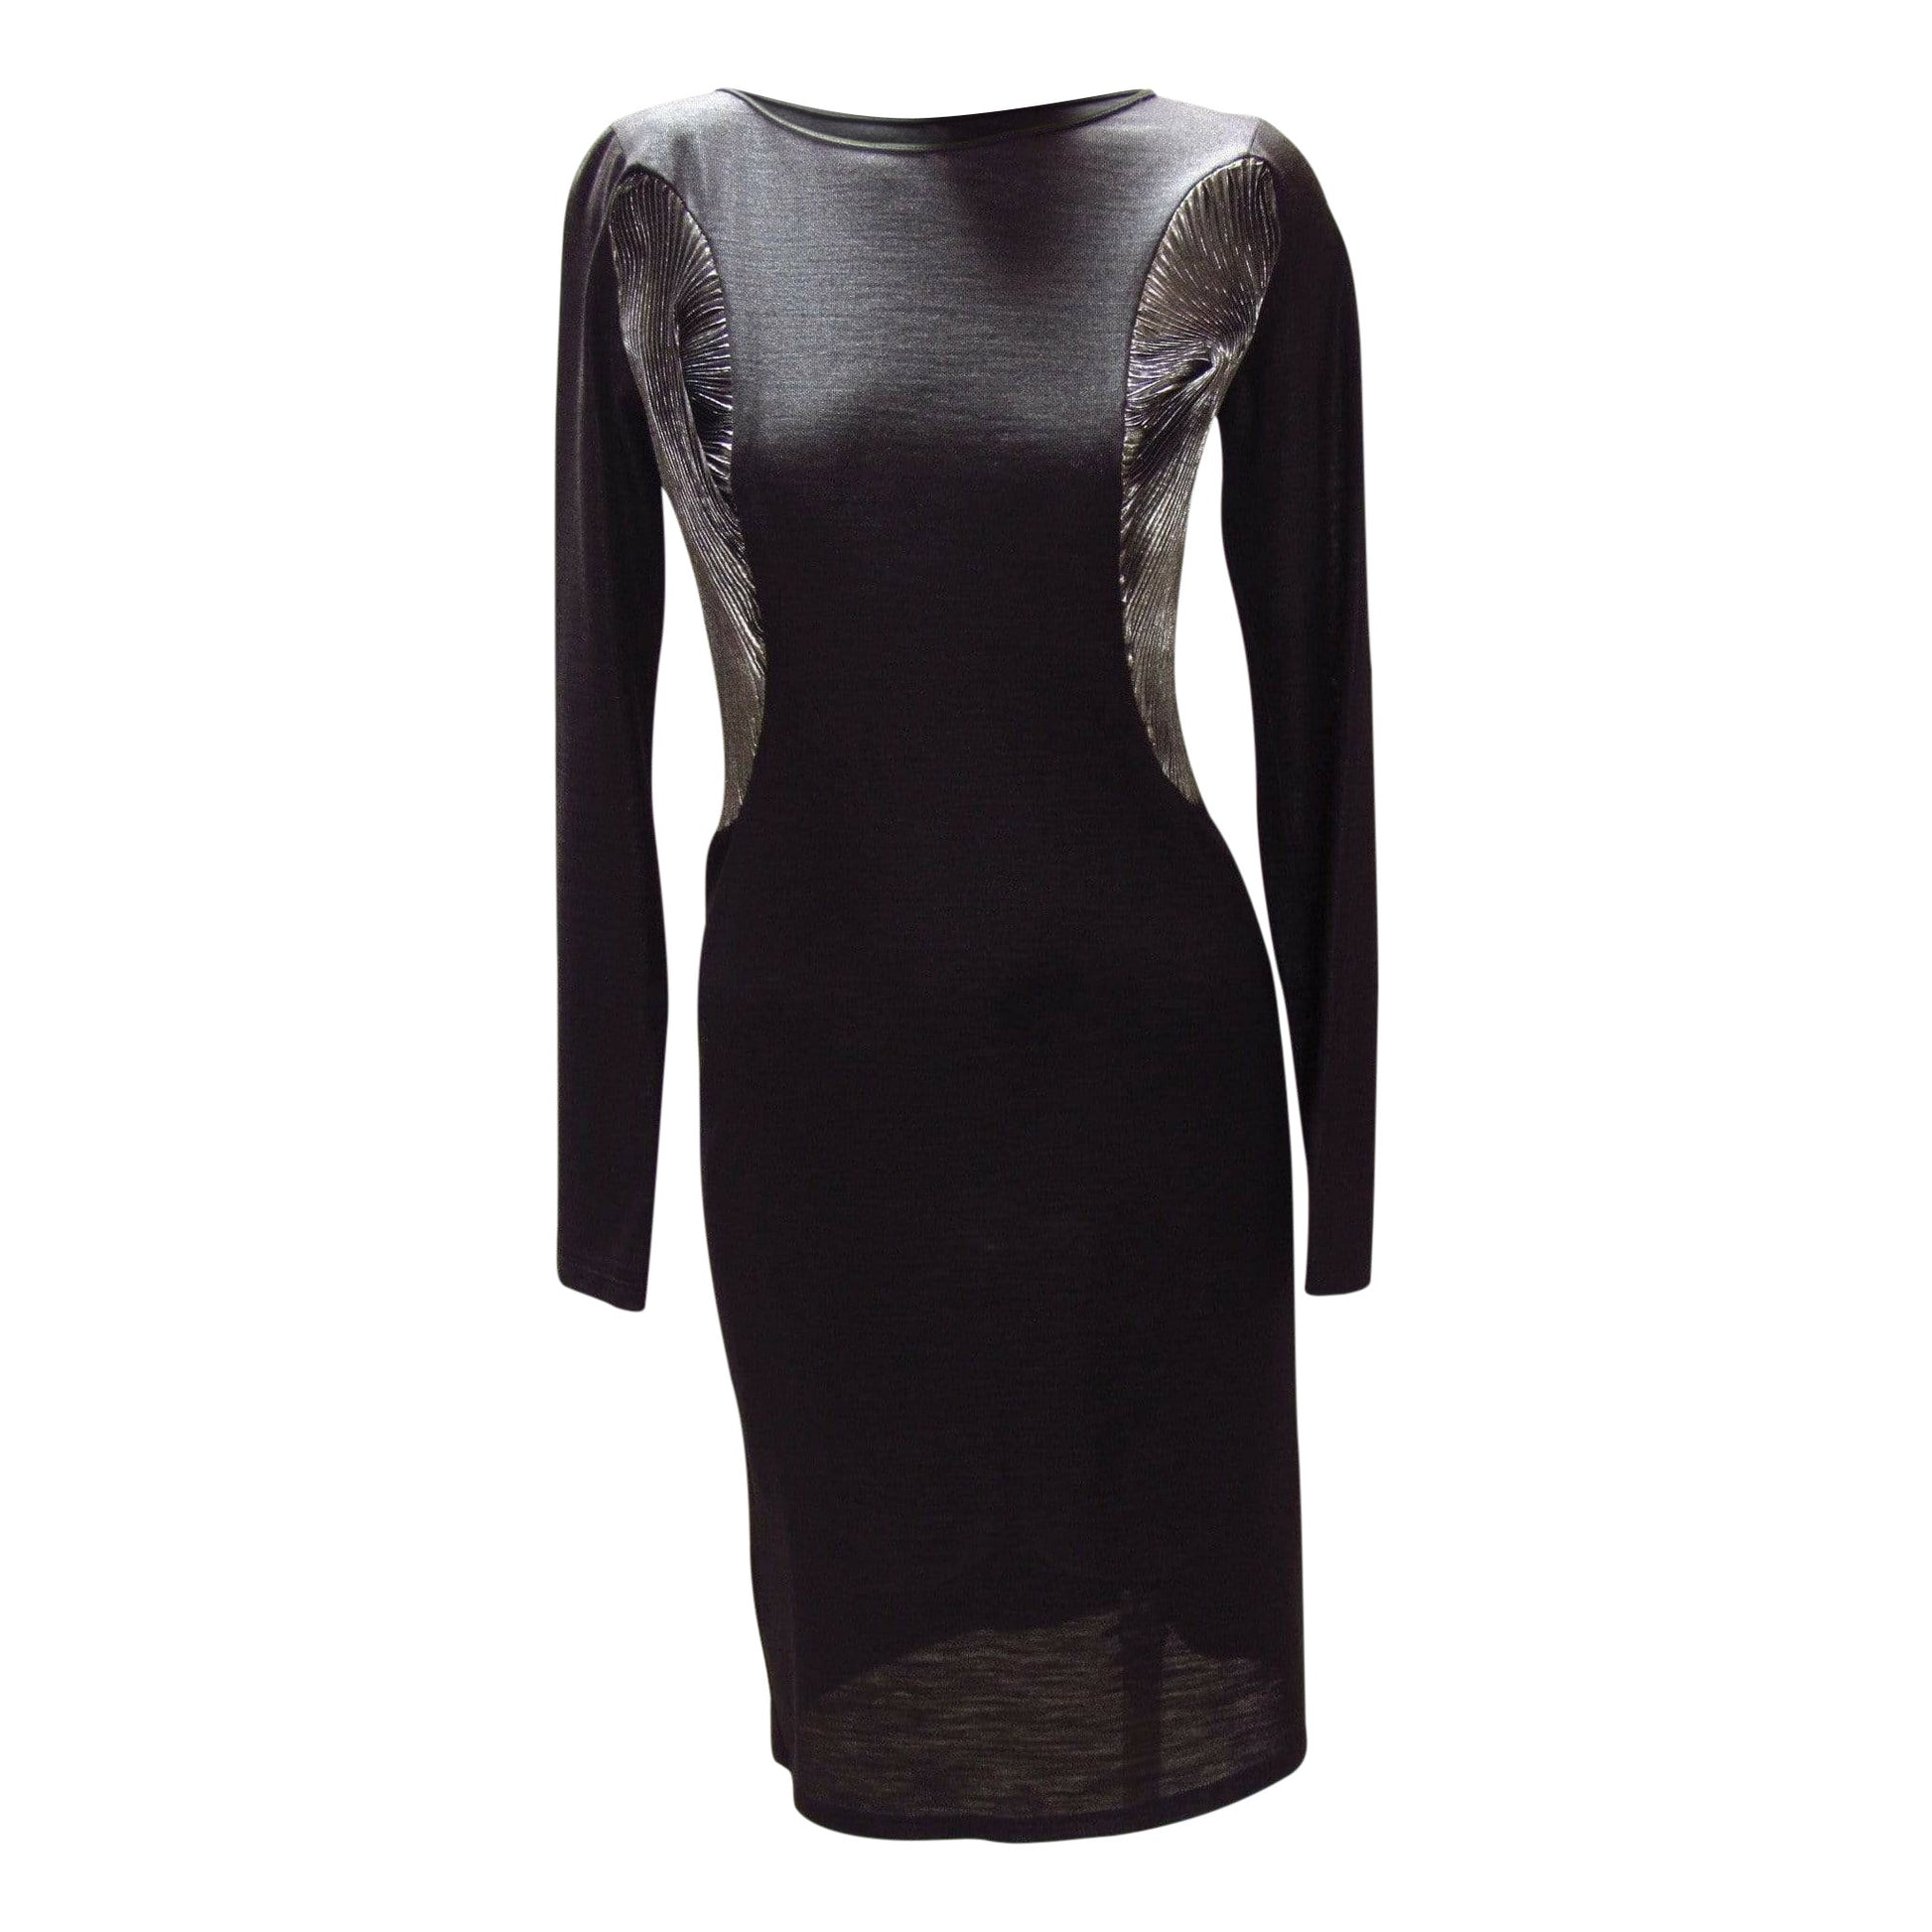 hussein-chalayan-black-and-silver-dress Dresses Black